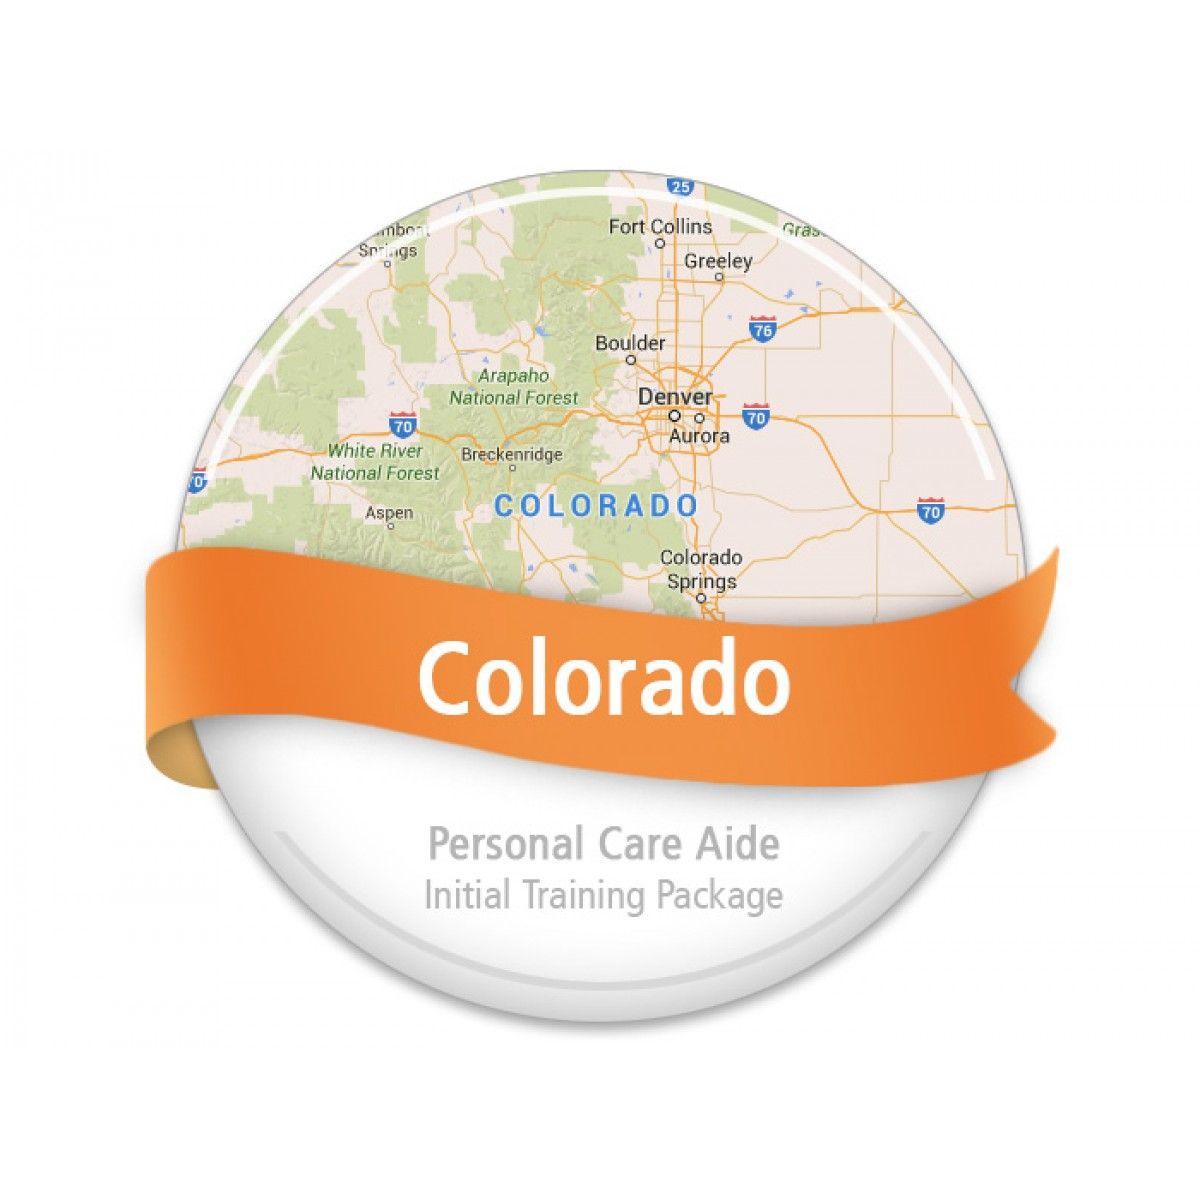 Personal Care Aide Logo - Colorado Personal Care Aide Initial Training Package. OnCourse